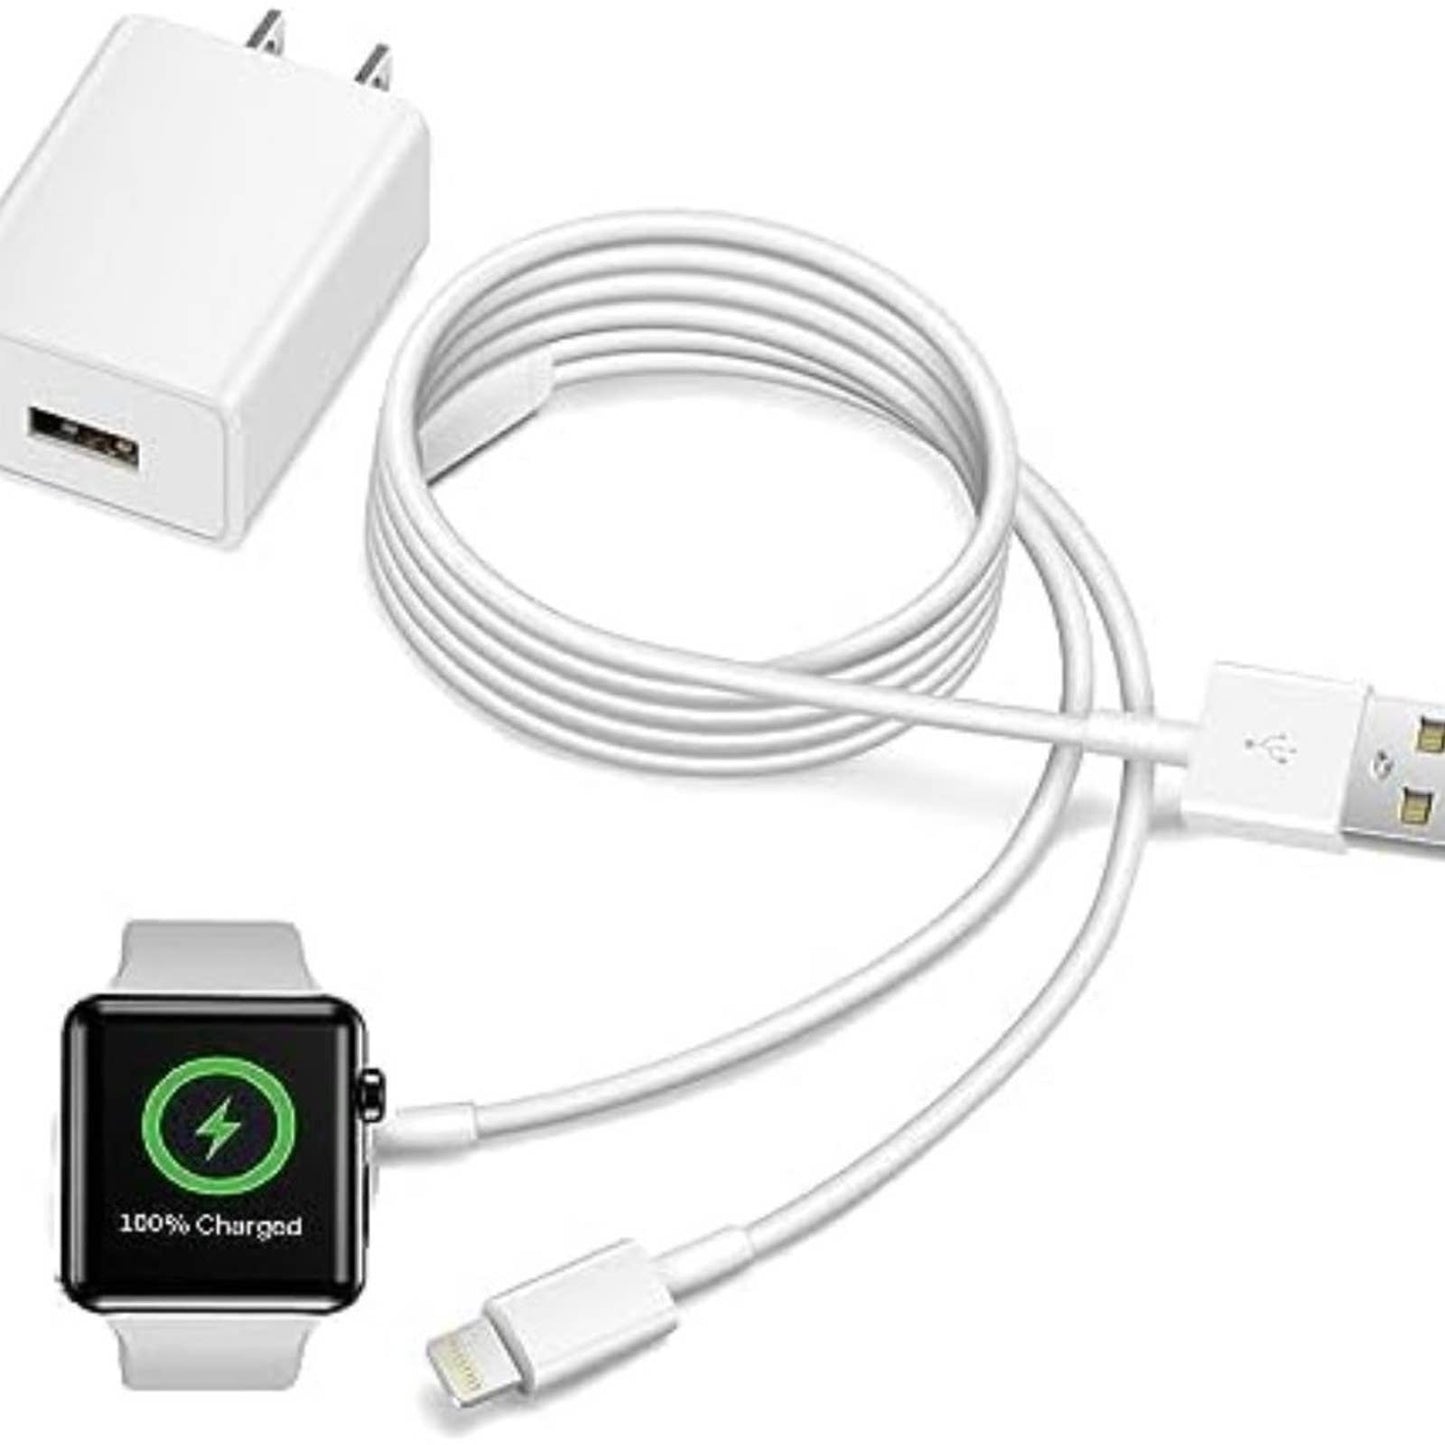 2 in 1 for Apple Watch Charger iWatch-Charger iPhone - with USB Wall Charger